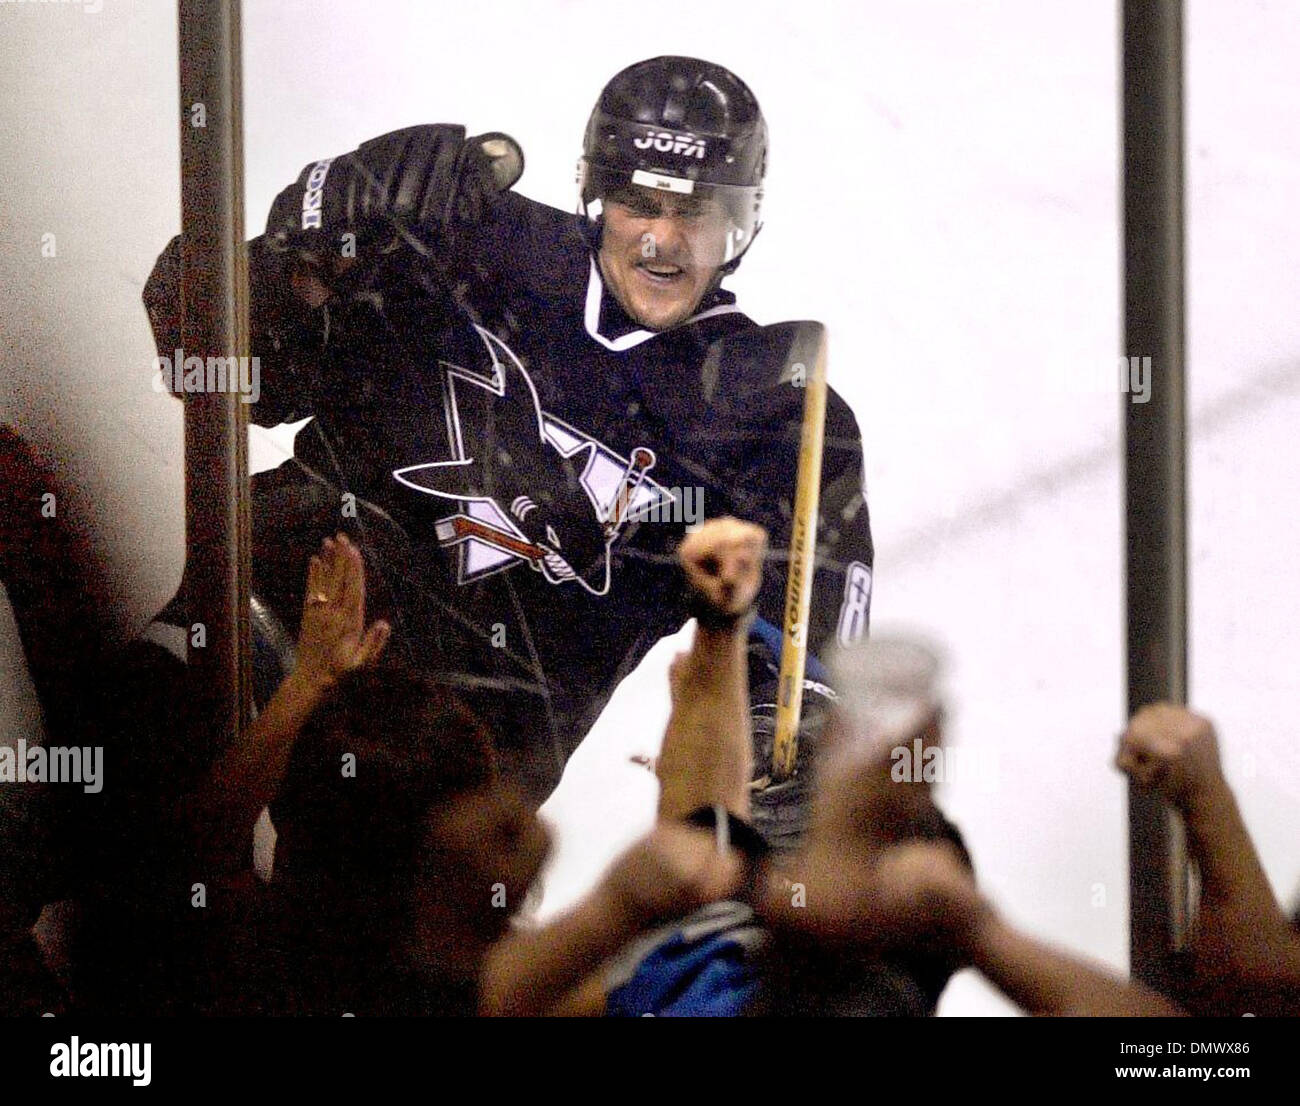 Teemu Selanne To Be Inducted Into The Hockey Hall Of Fame, 58% OFF